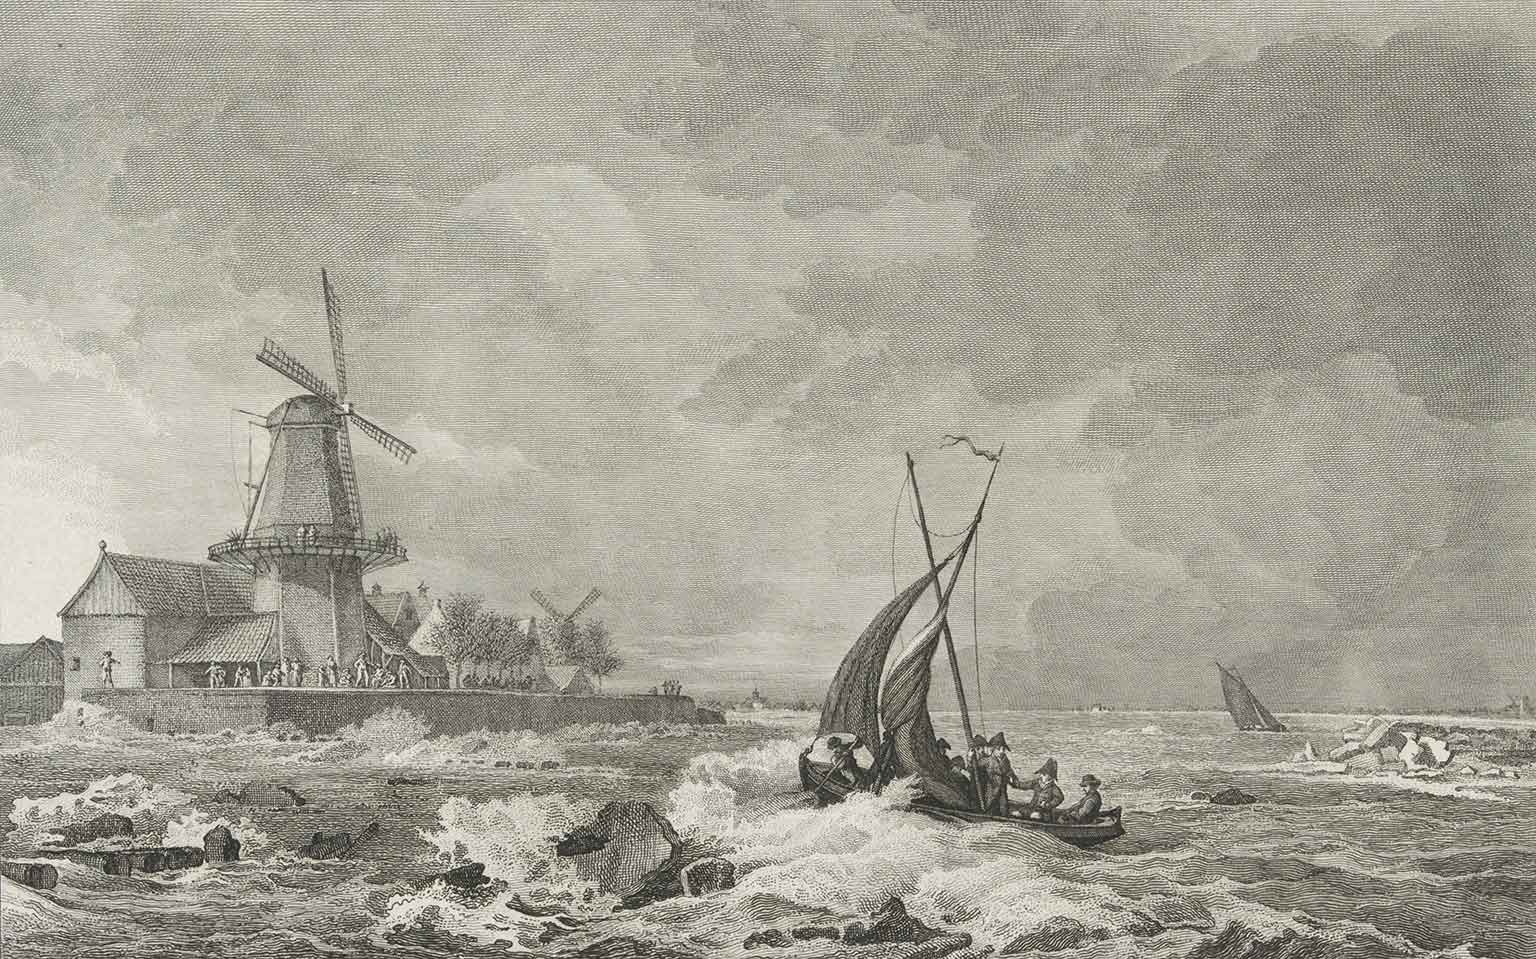 King Louis Napoleon crosses from Dalem to Gorinchem in the flooded Betuwe region in January 1809